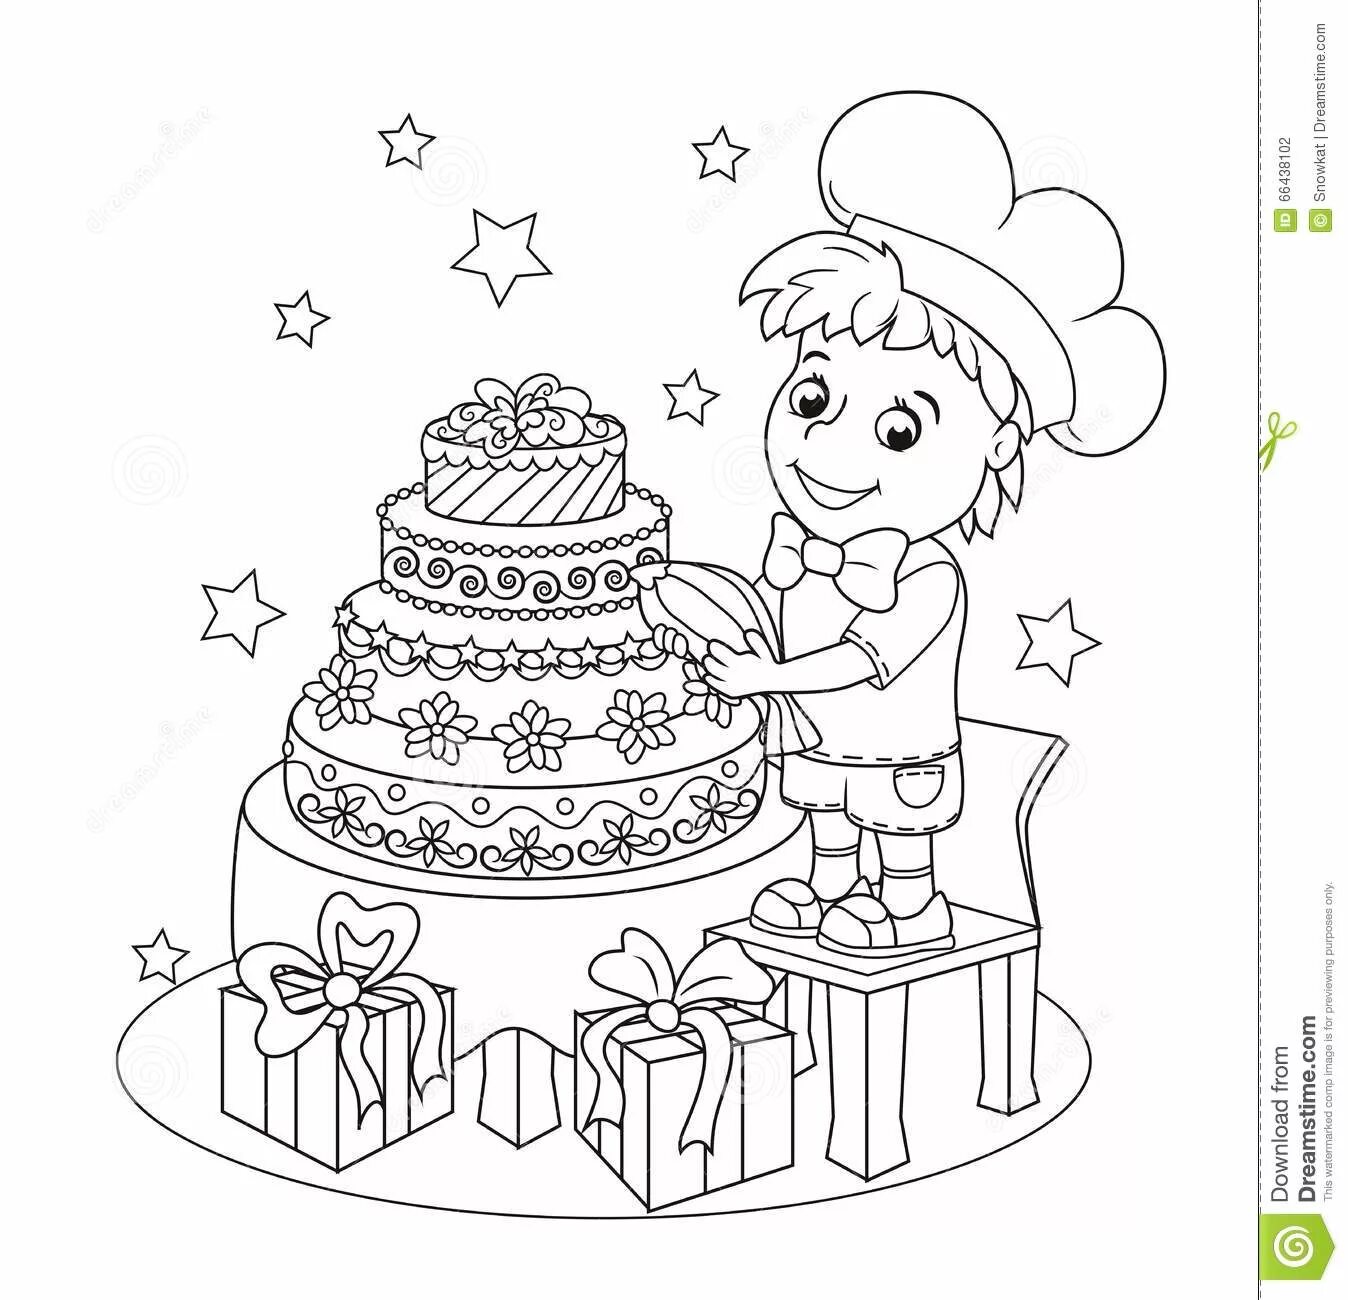 Coloring book pastry chef with color illumination